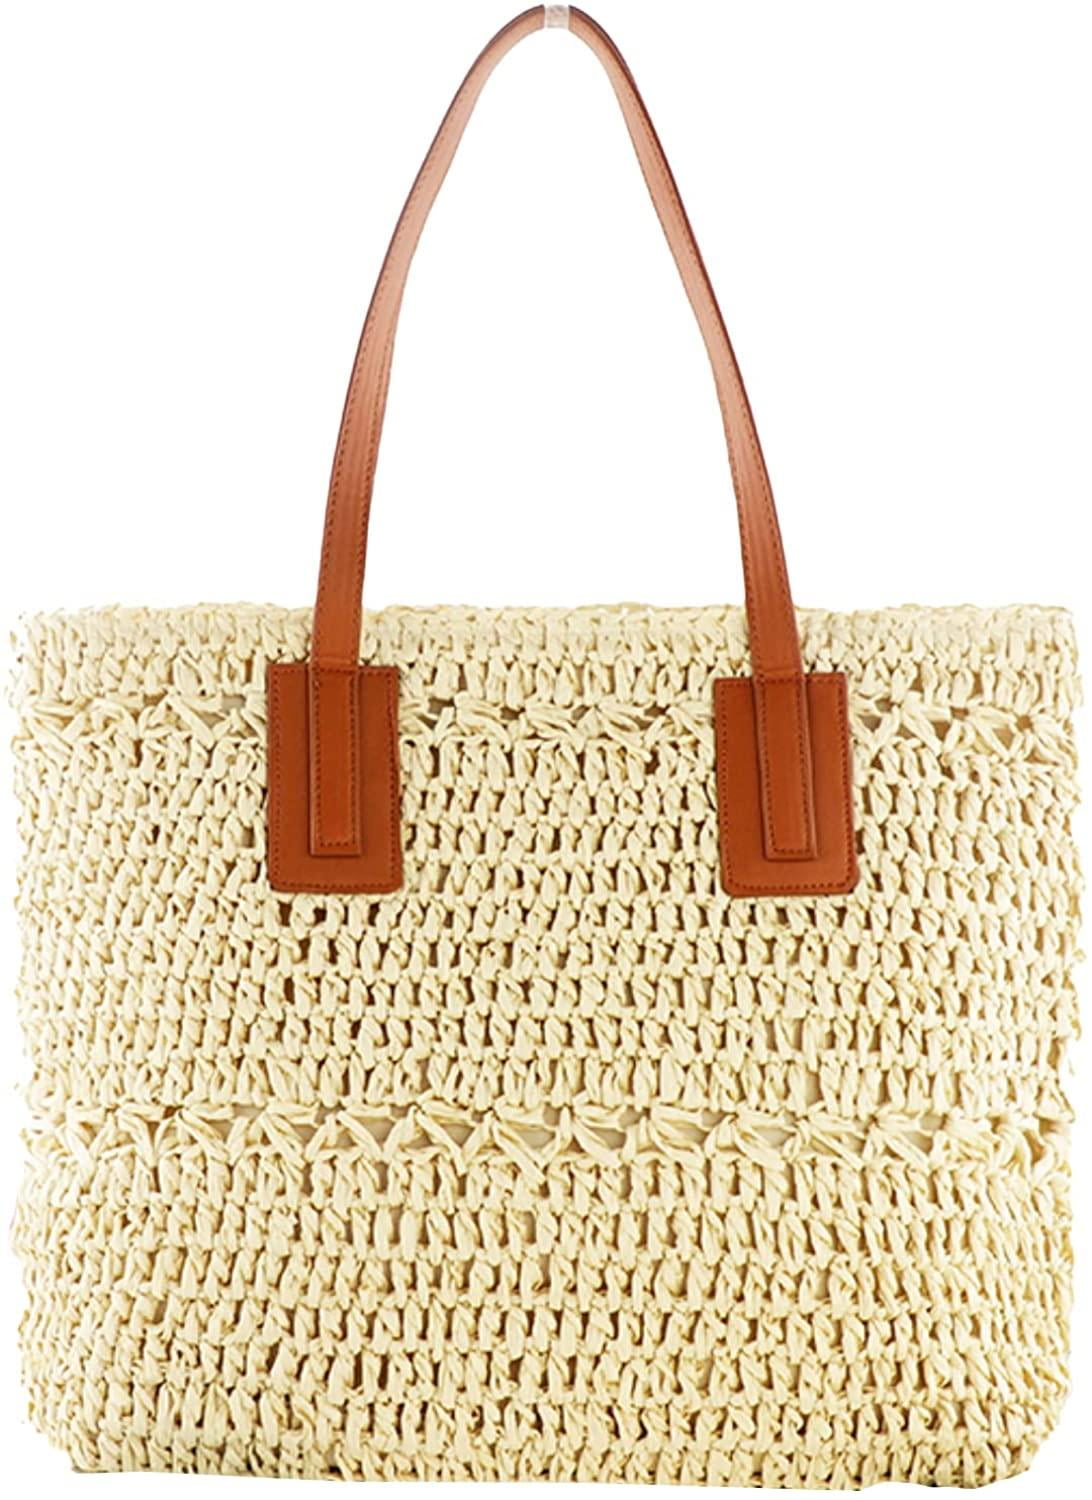 MAMUNU Straw Bag for Women Summer, Large Straw Beach Tote Bag for Travel  Vacation, Straw Shoulder Bag with Zipper and Lining